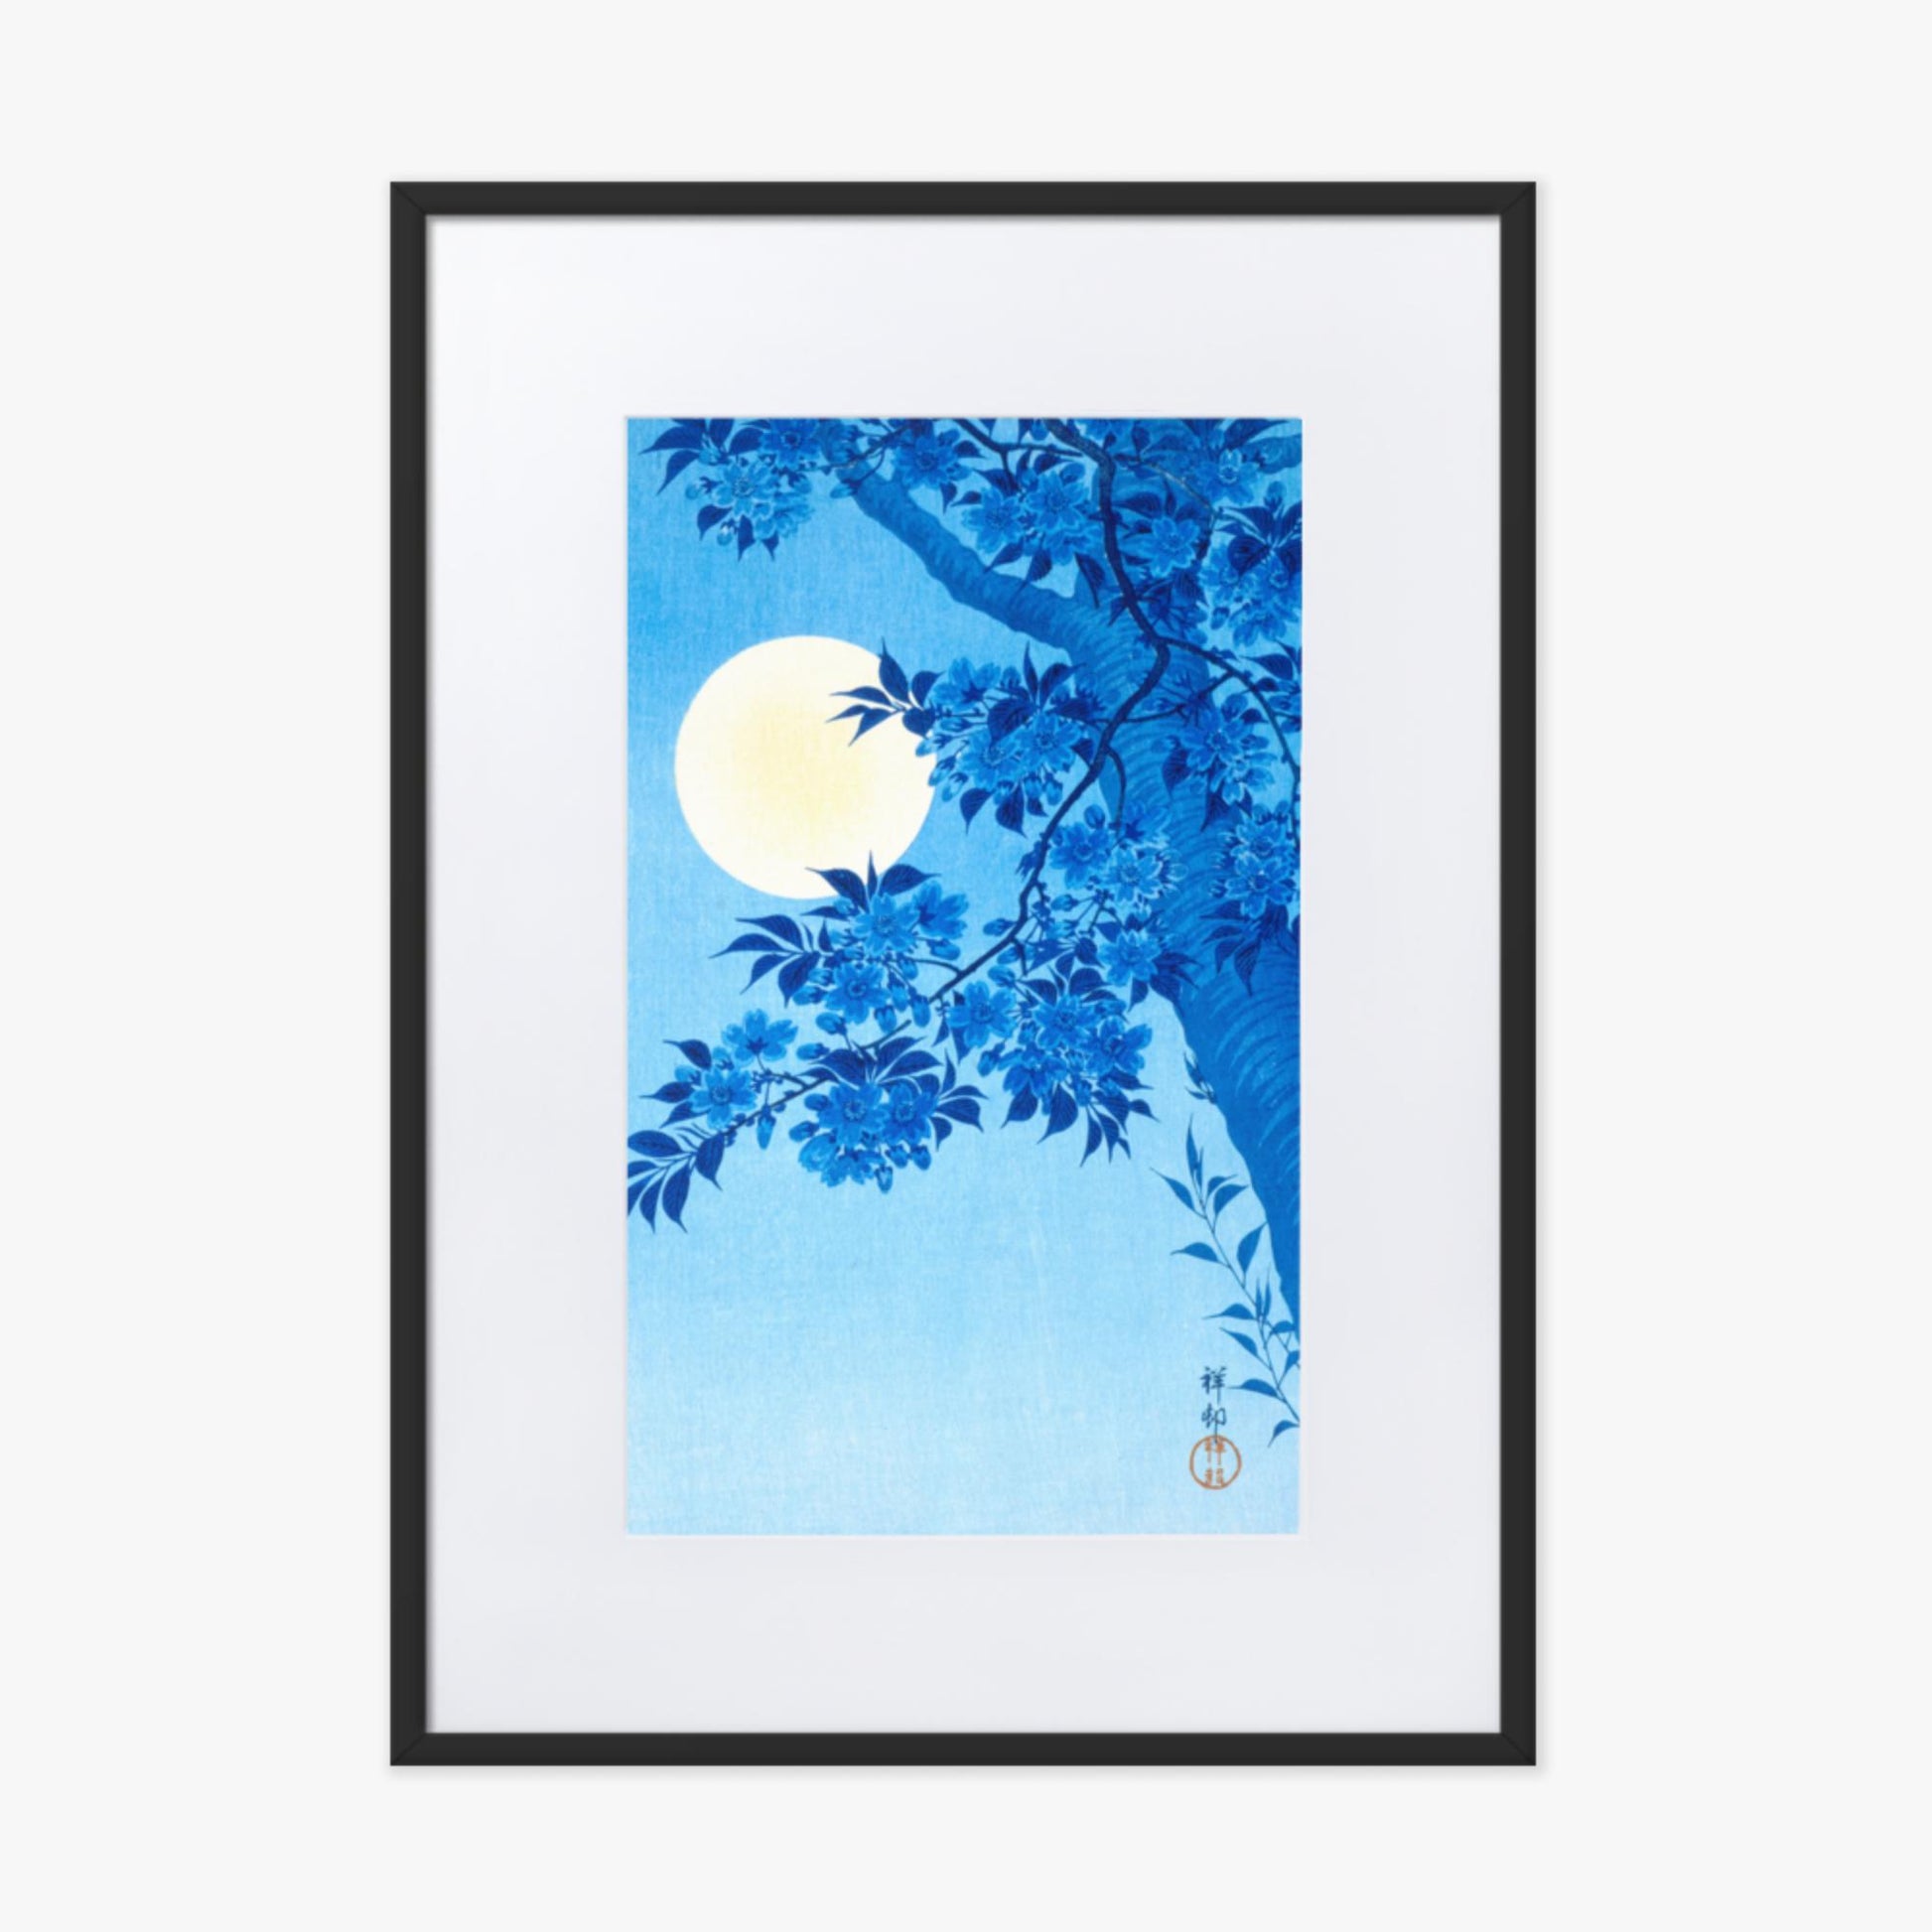 Ohara Koson - Blossoming Cherry on a Moonlit Night 50x70 cm Poster With Black Frame